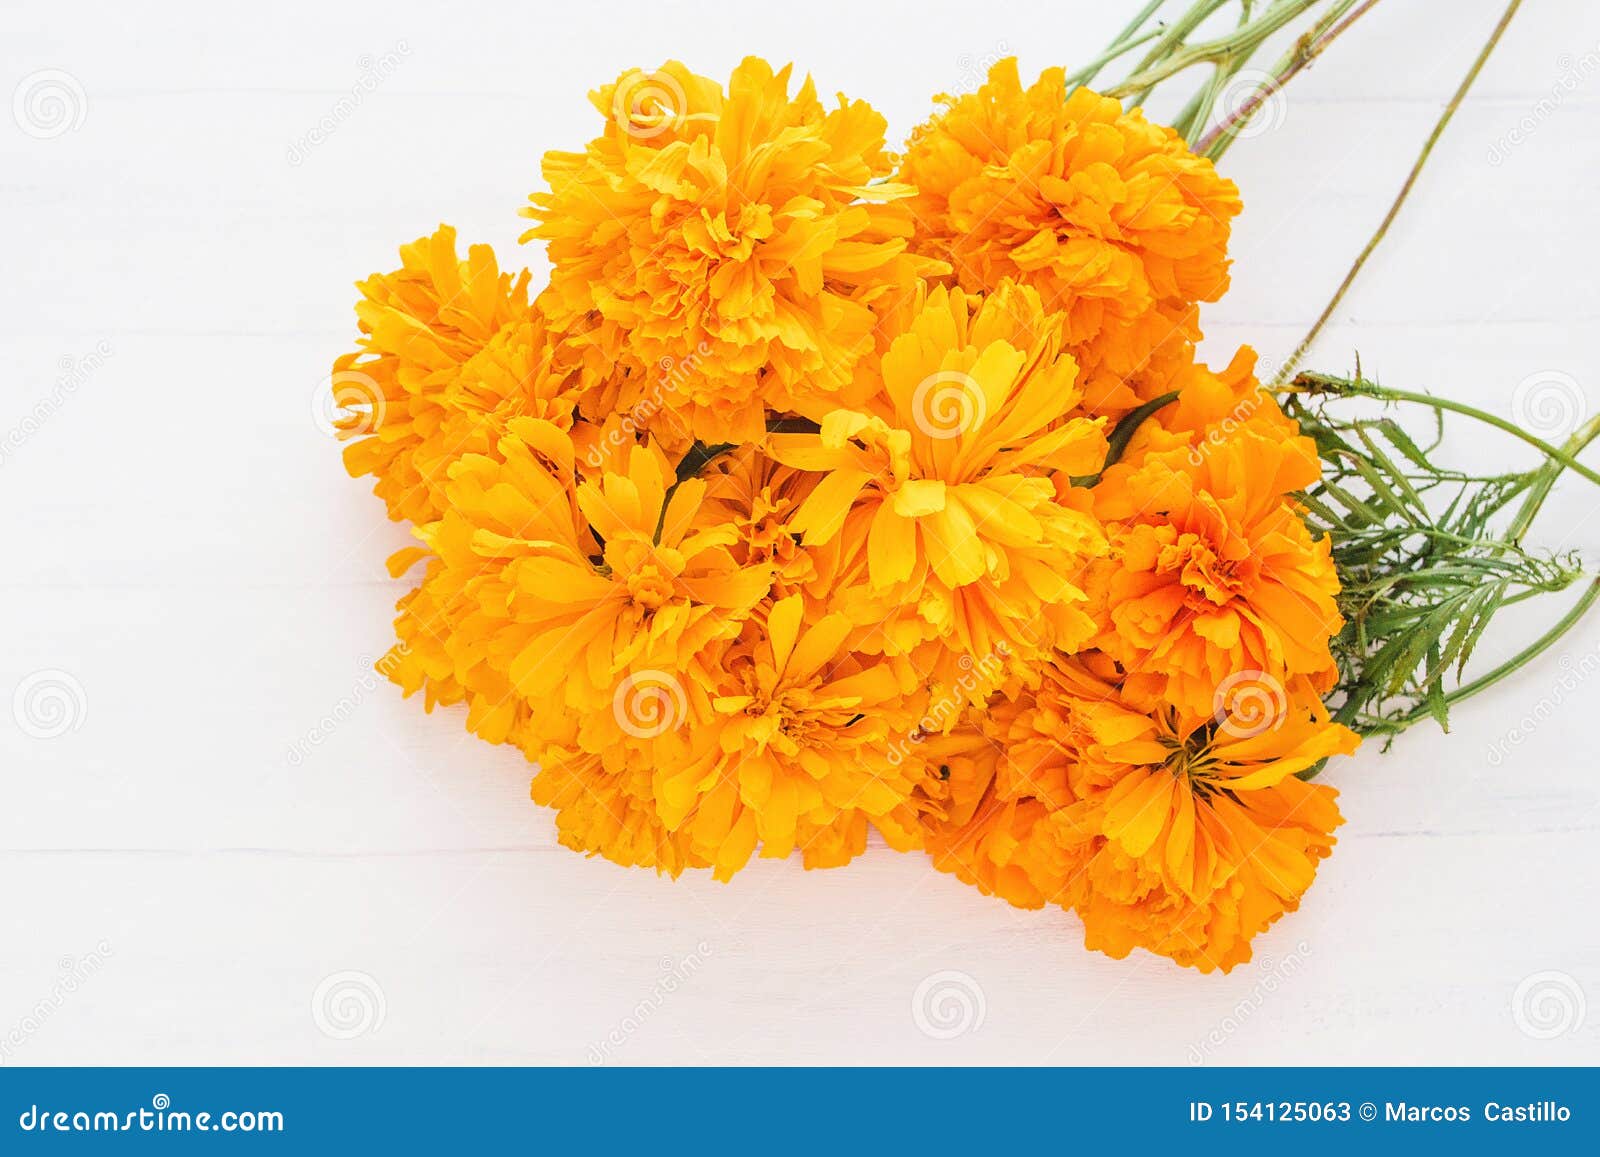 Flor De Cempasuchil, Mexican Flowers in Day of the Dead MÃ©xico Stock Image  - Image of culture, beauty: 154125063